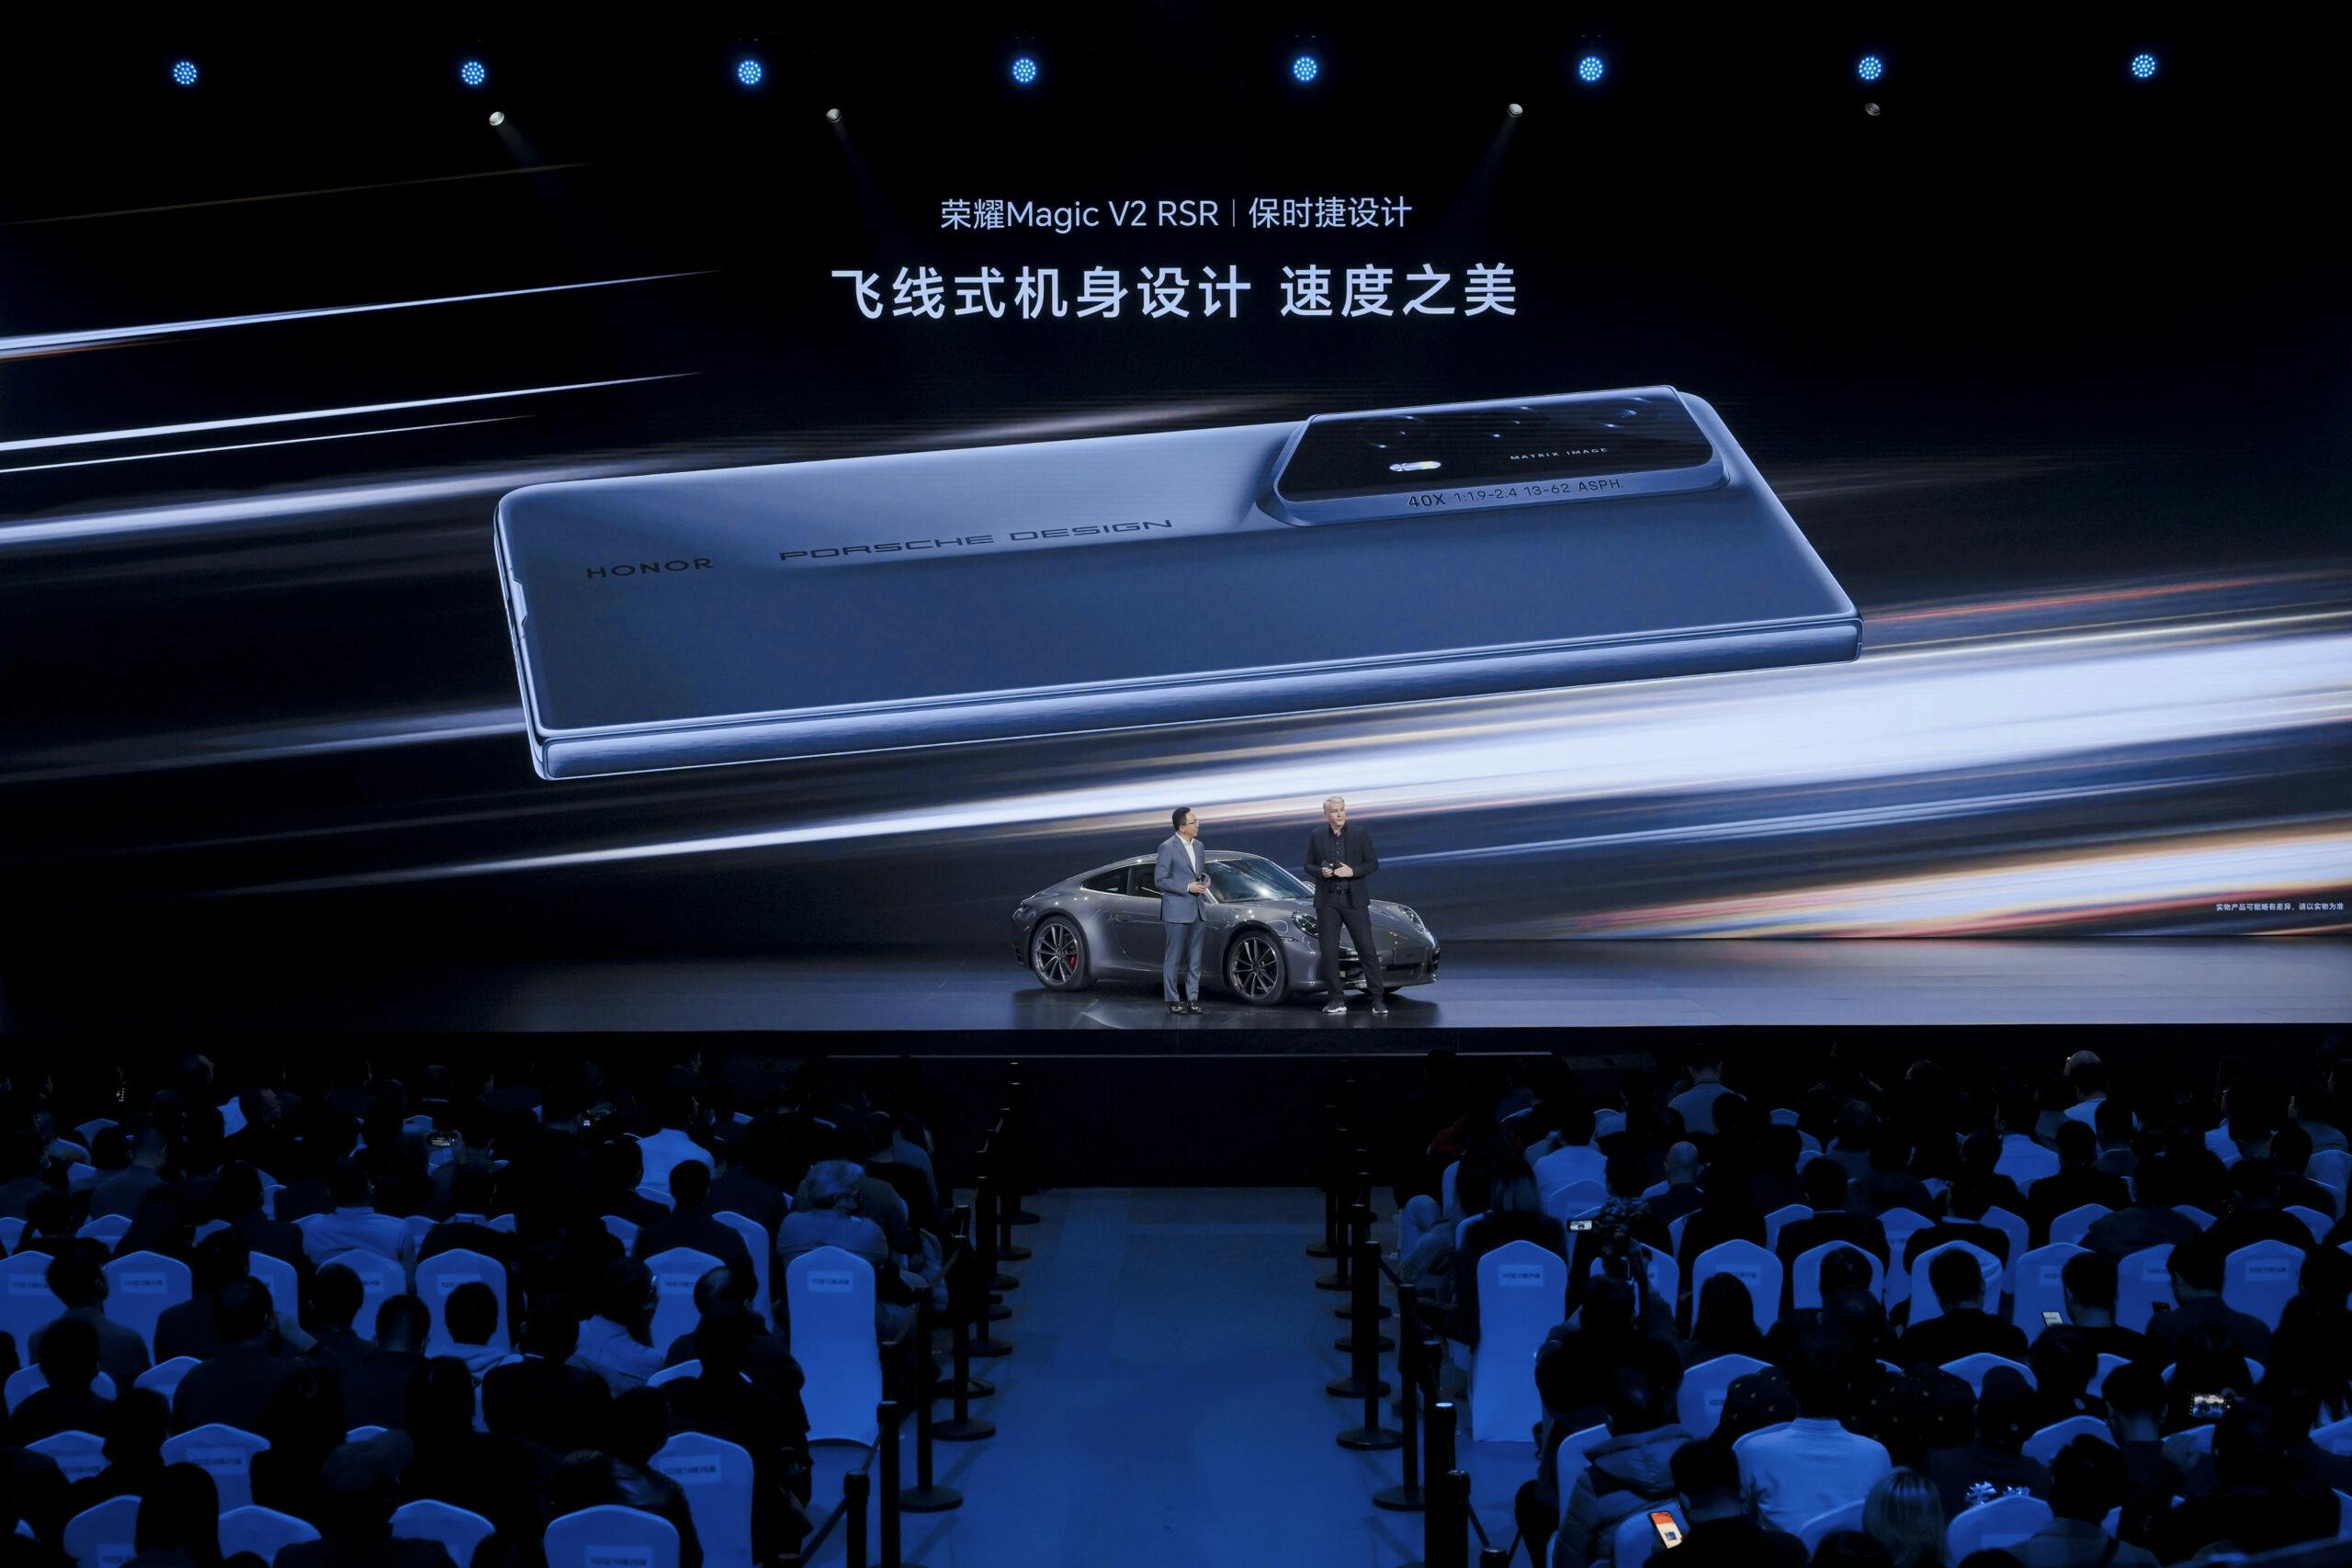 The First Jointly Developed Smartphone is the Thinnest Inward Foldable Smartphone on the Market